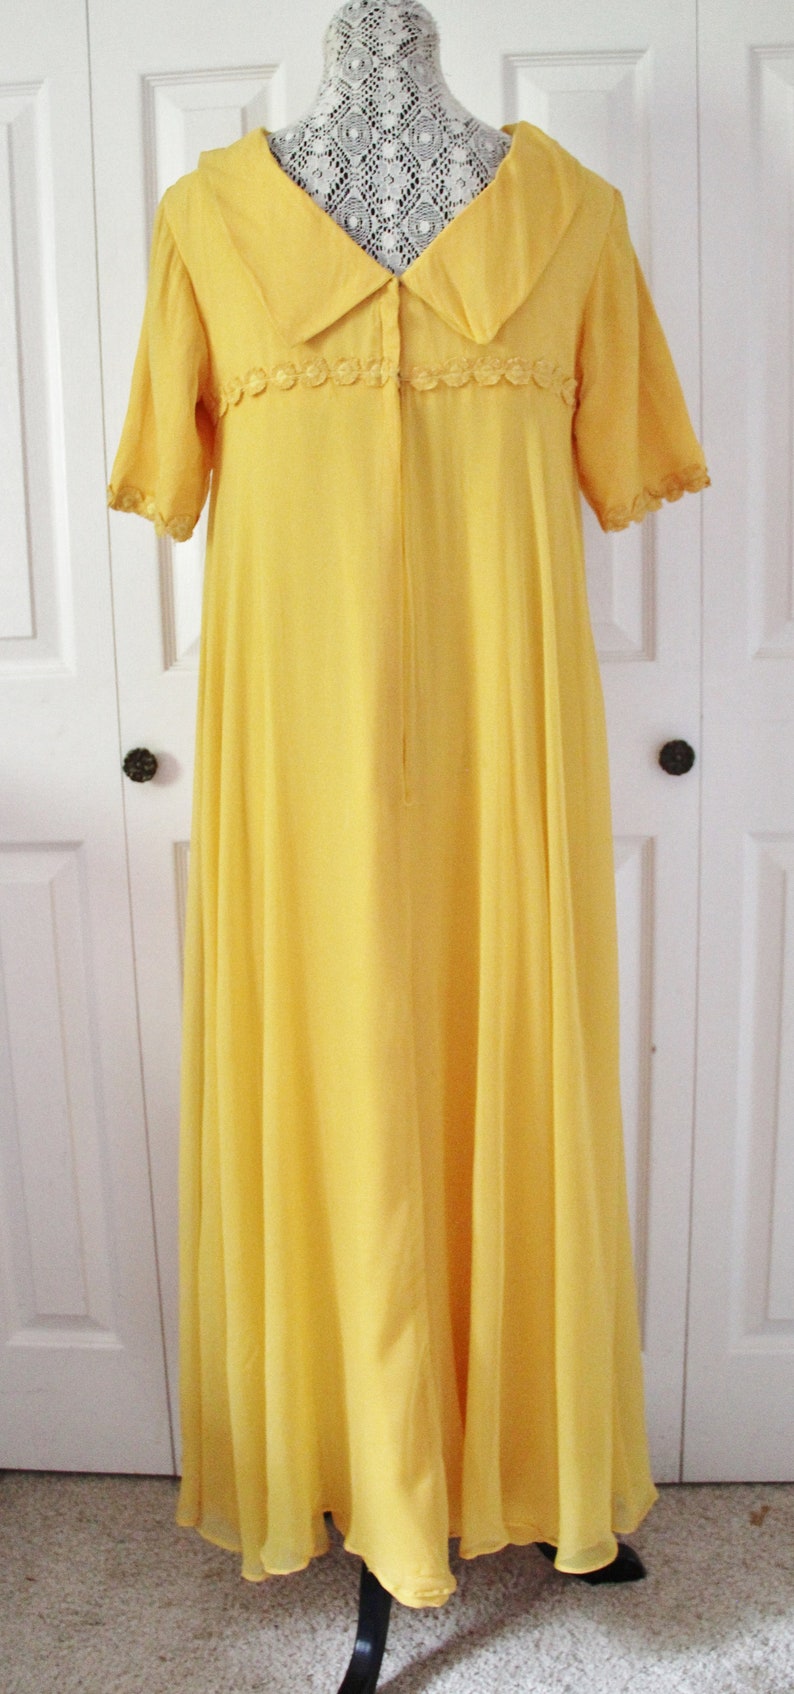 1960s Sunny Yellow Prom or Formal Dress Medium to Large | Etsy